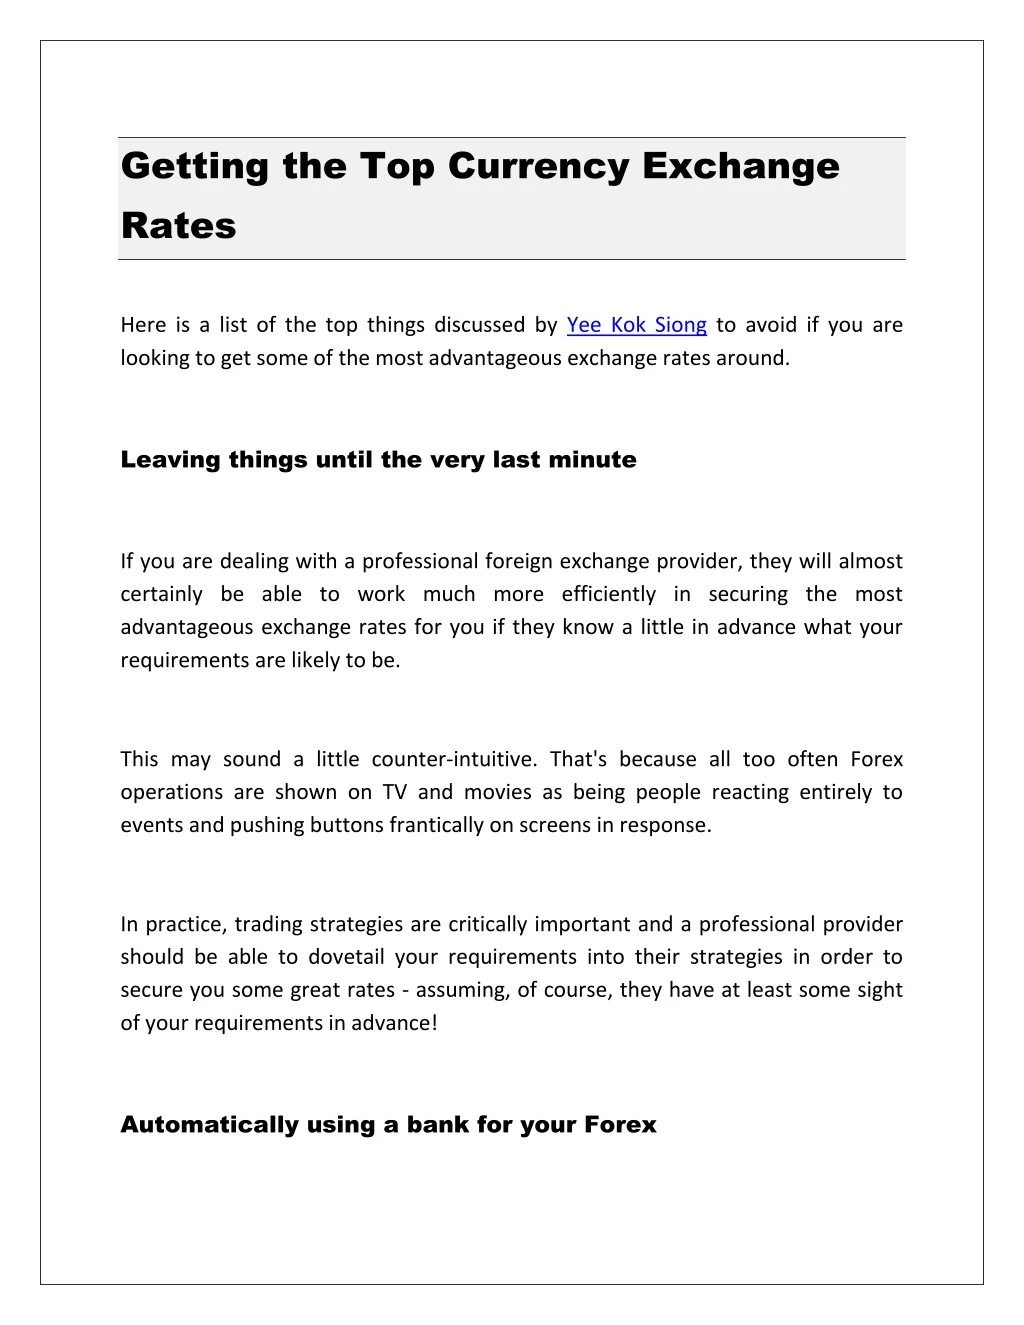 getting the top currency exchange rates